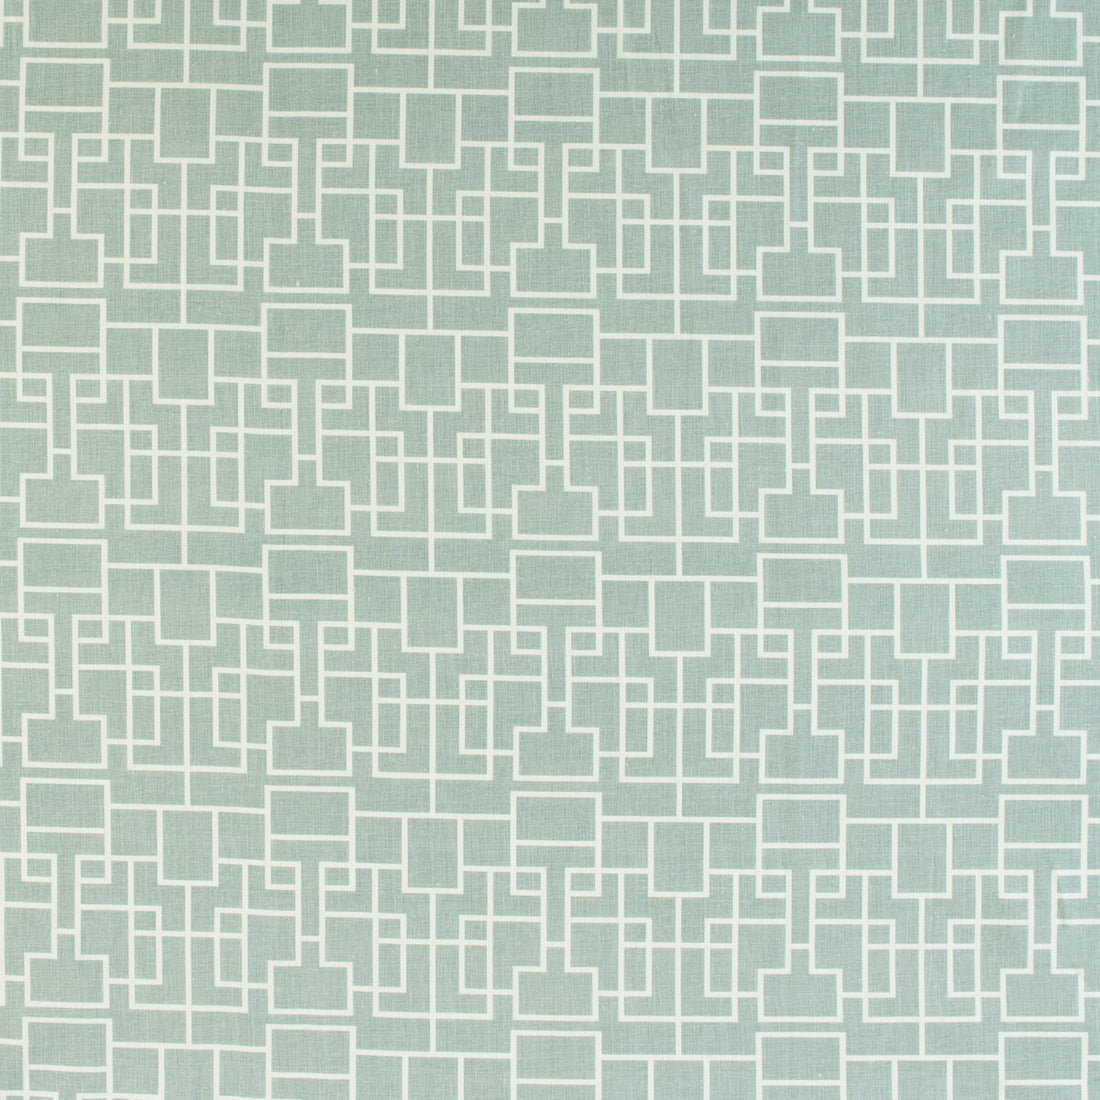 Garden Key fabric in cactus color - pattern GARDEN KEY.3.0 - by Kravet Design in the Barbara Barry Home Midsummer collection